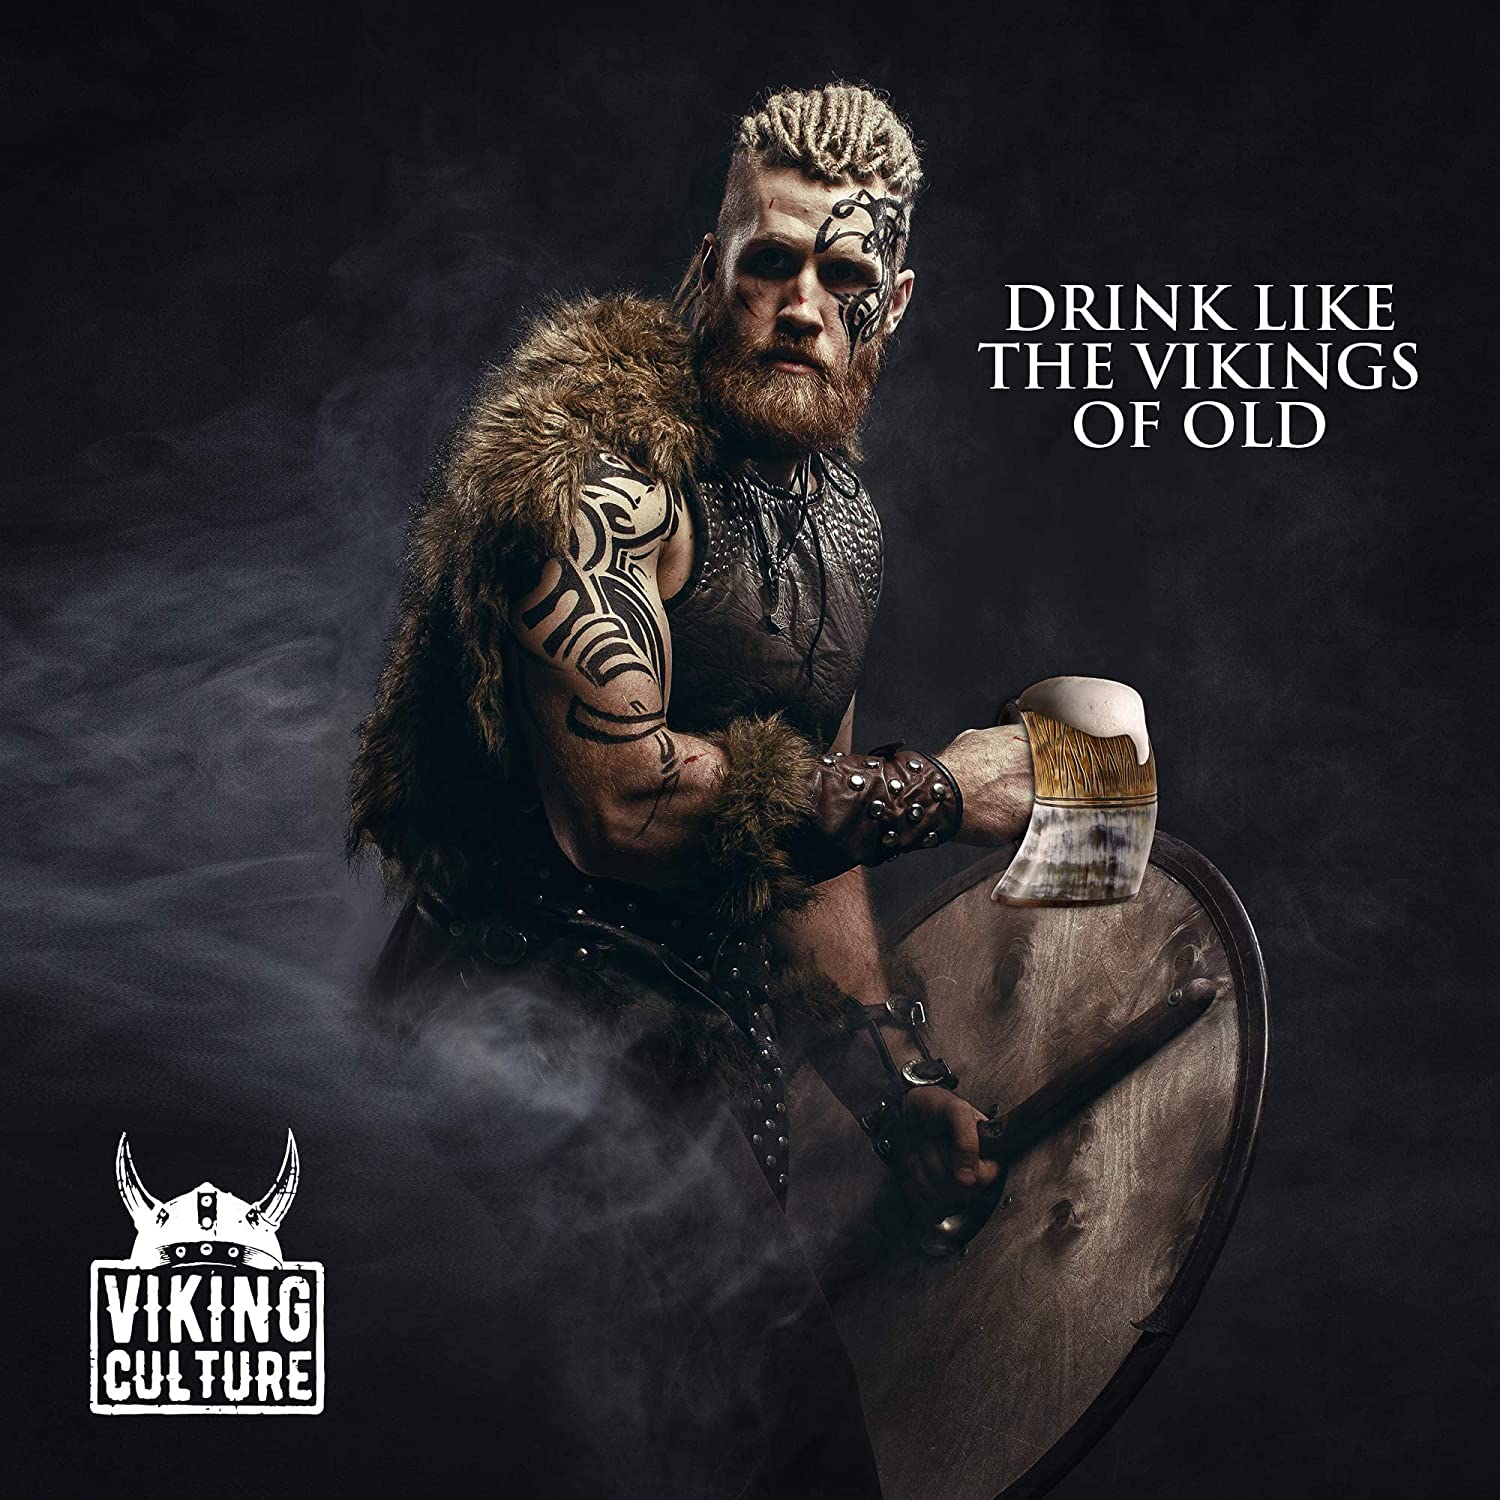 A Viking looking man holding an ox horn mug full of beer. The text reads, 'Drink like the Vikings of old.'